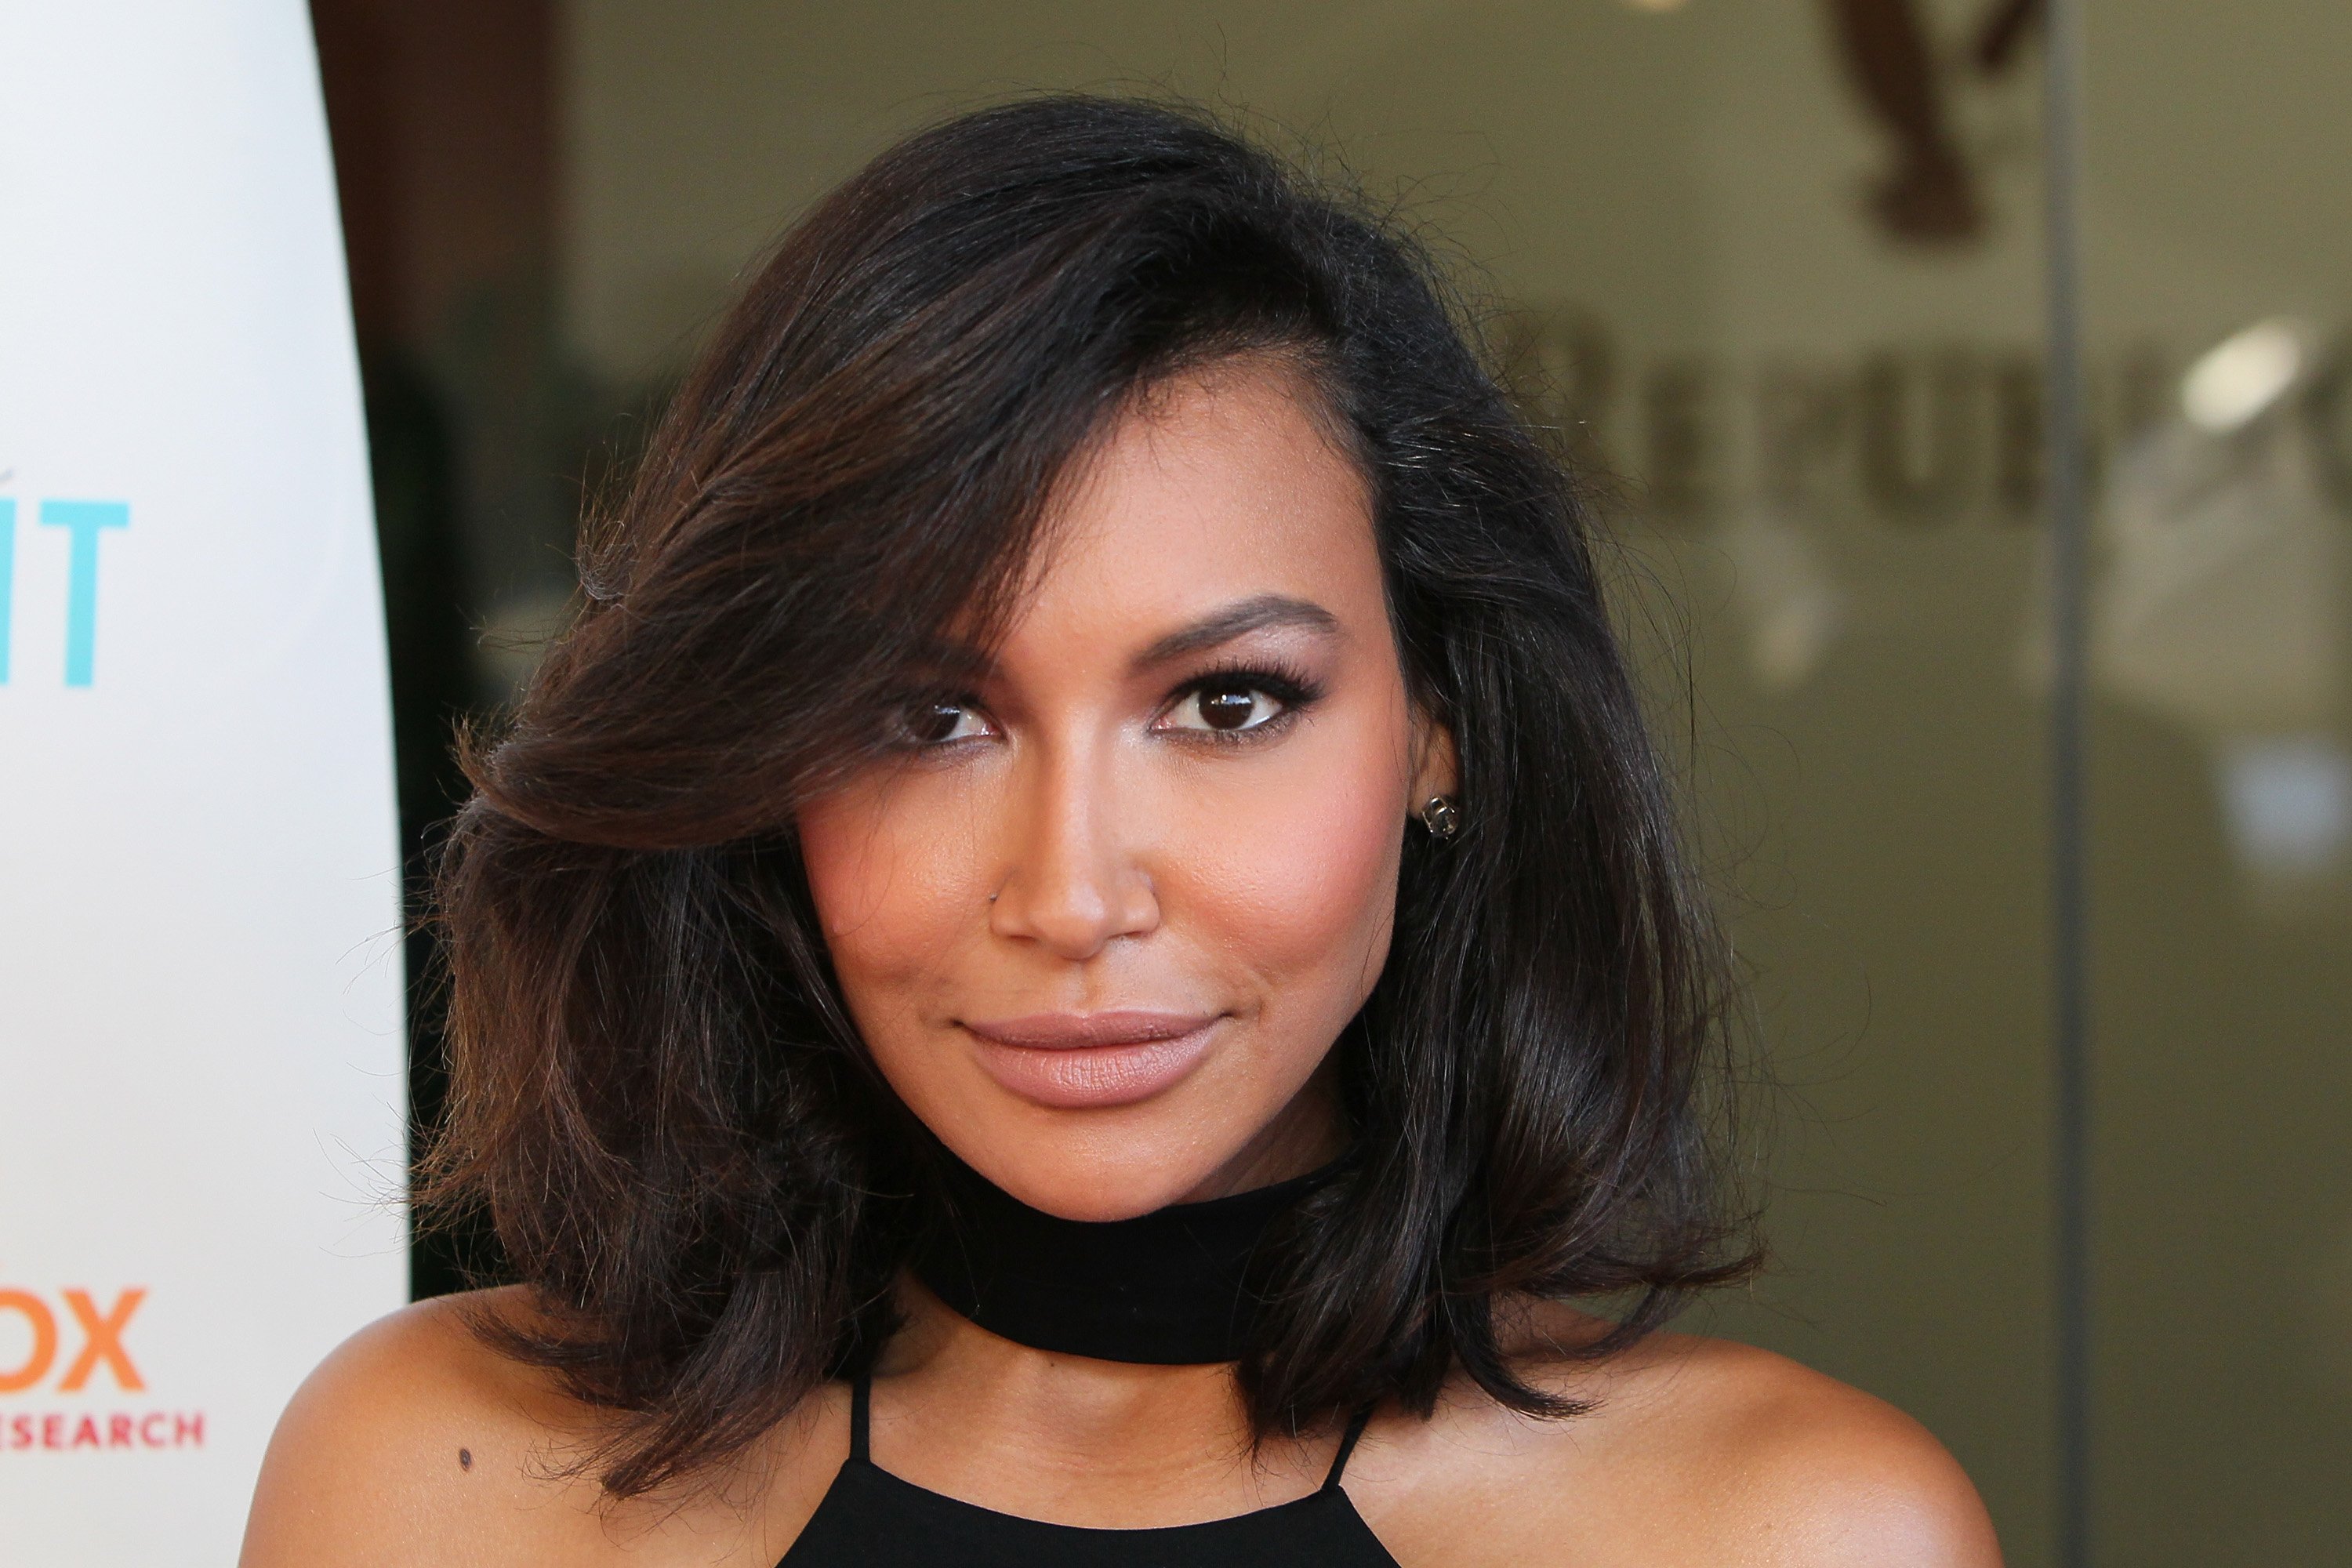 Naya Rivera Had a Medical Condition That May Have Contributed to Her Death